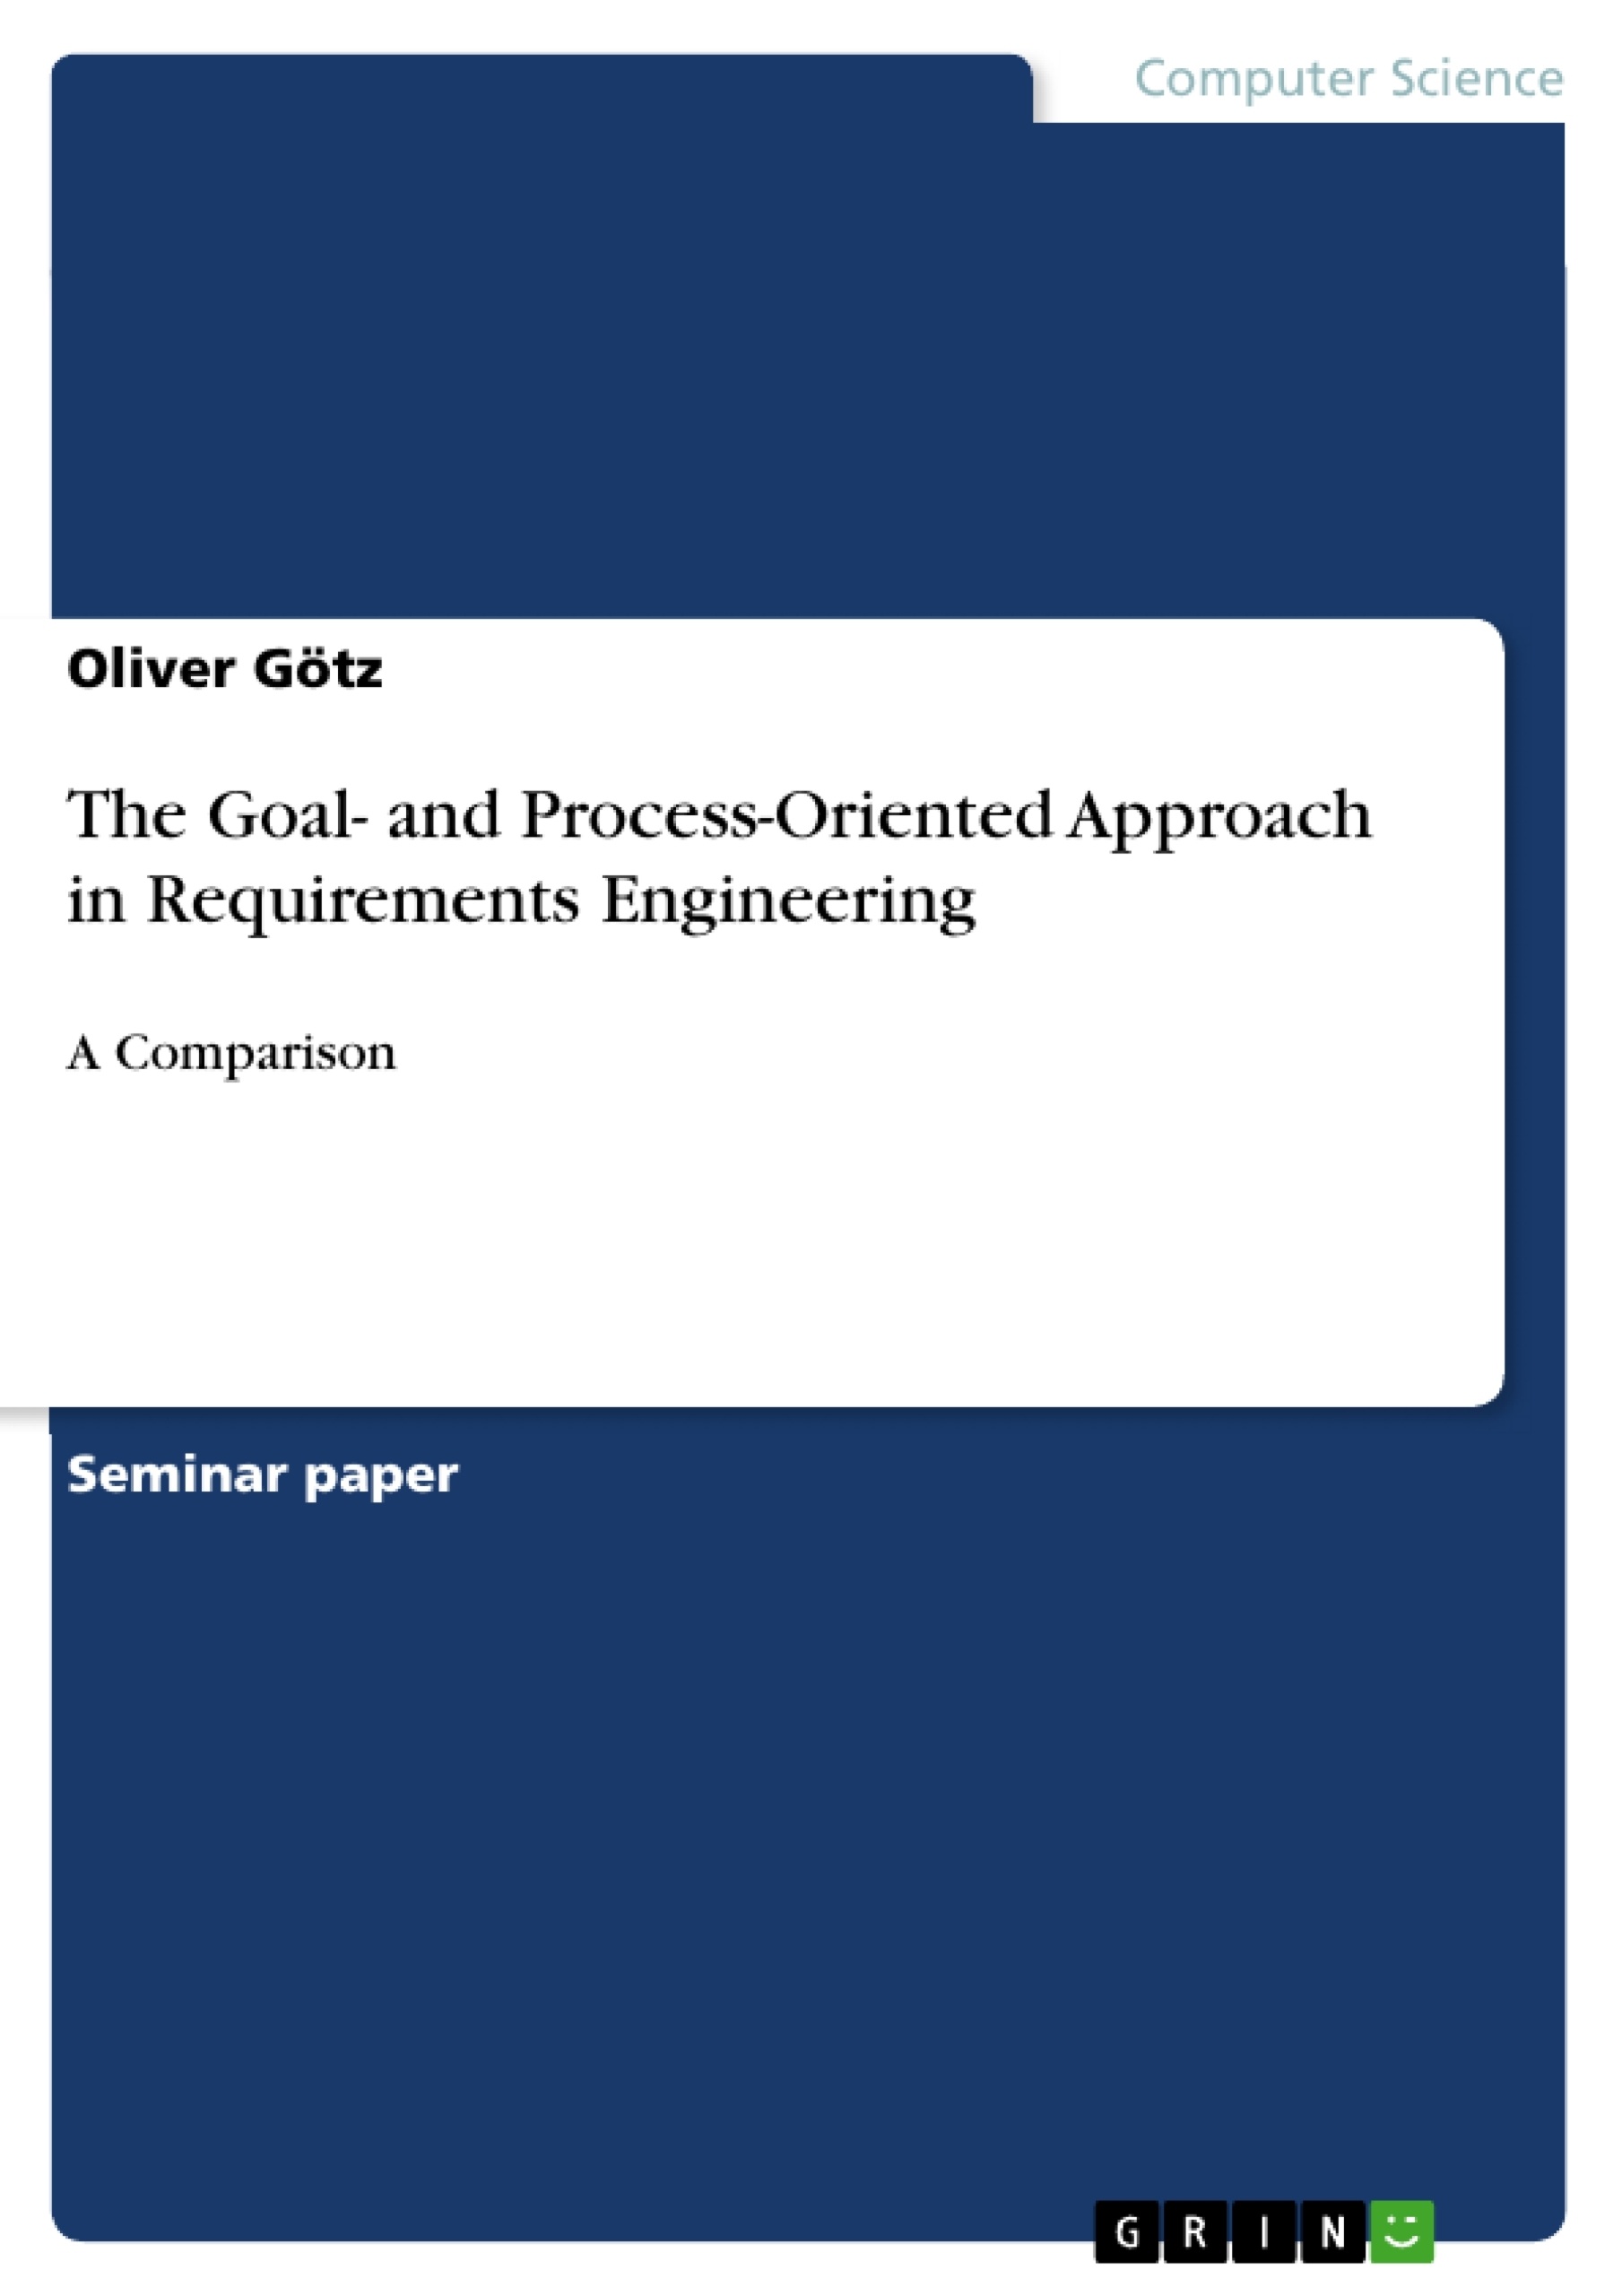 Titel: The Goal- and Process-Oriented Approach in Requirements Engineering